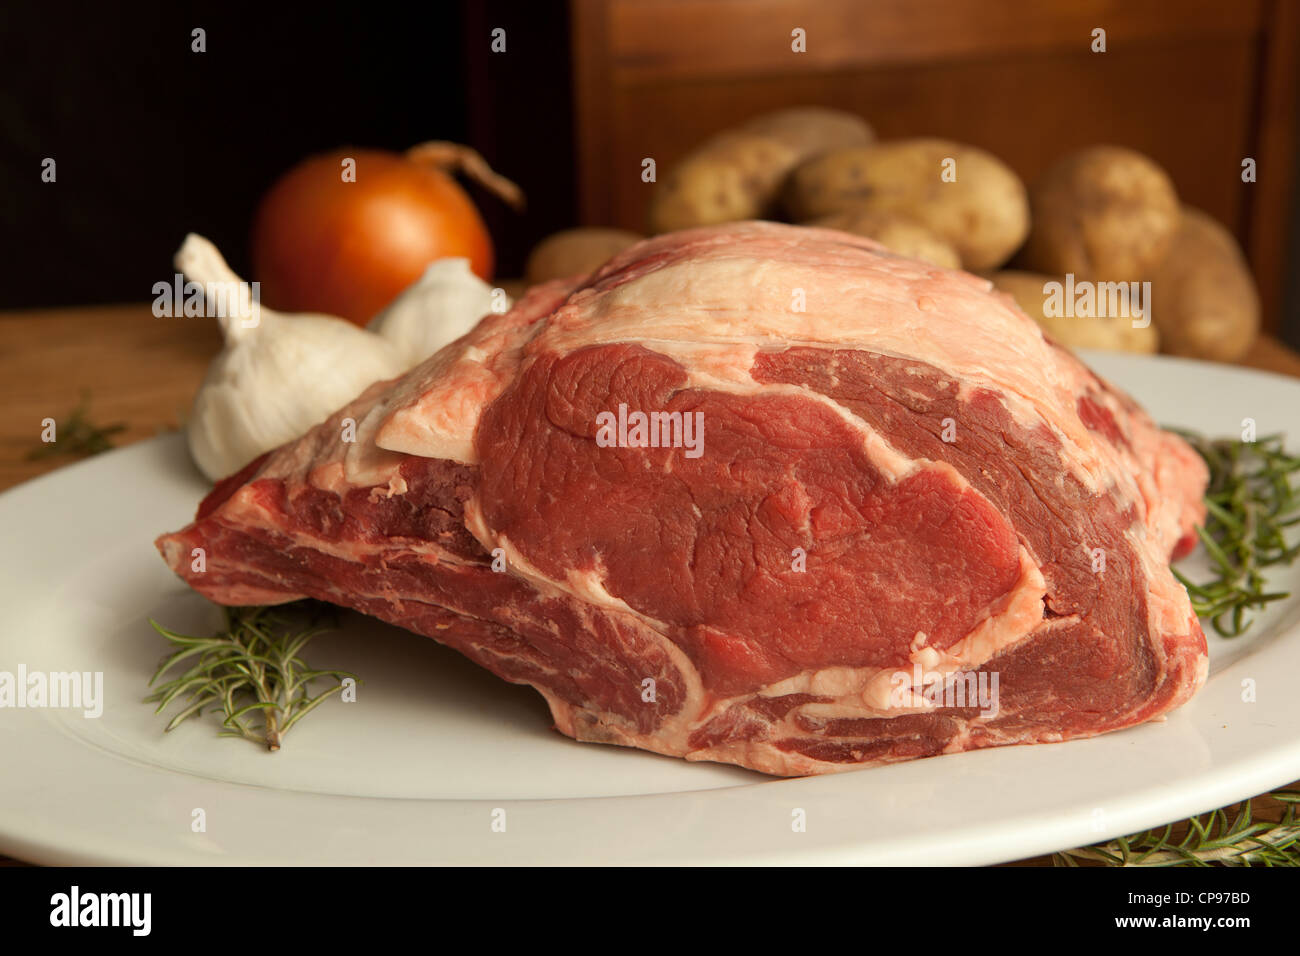 View of large bone in prime rib beef roast garnished with herbs and vegetables. Stock Photo